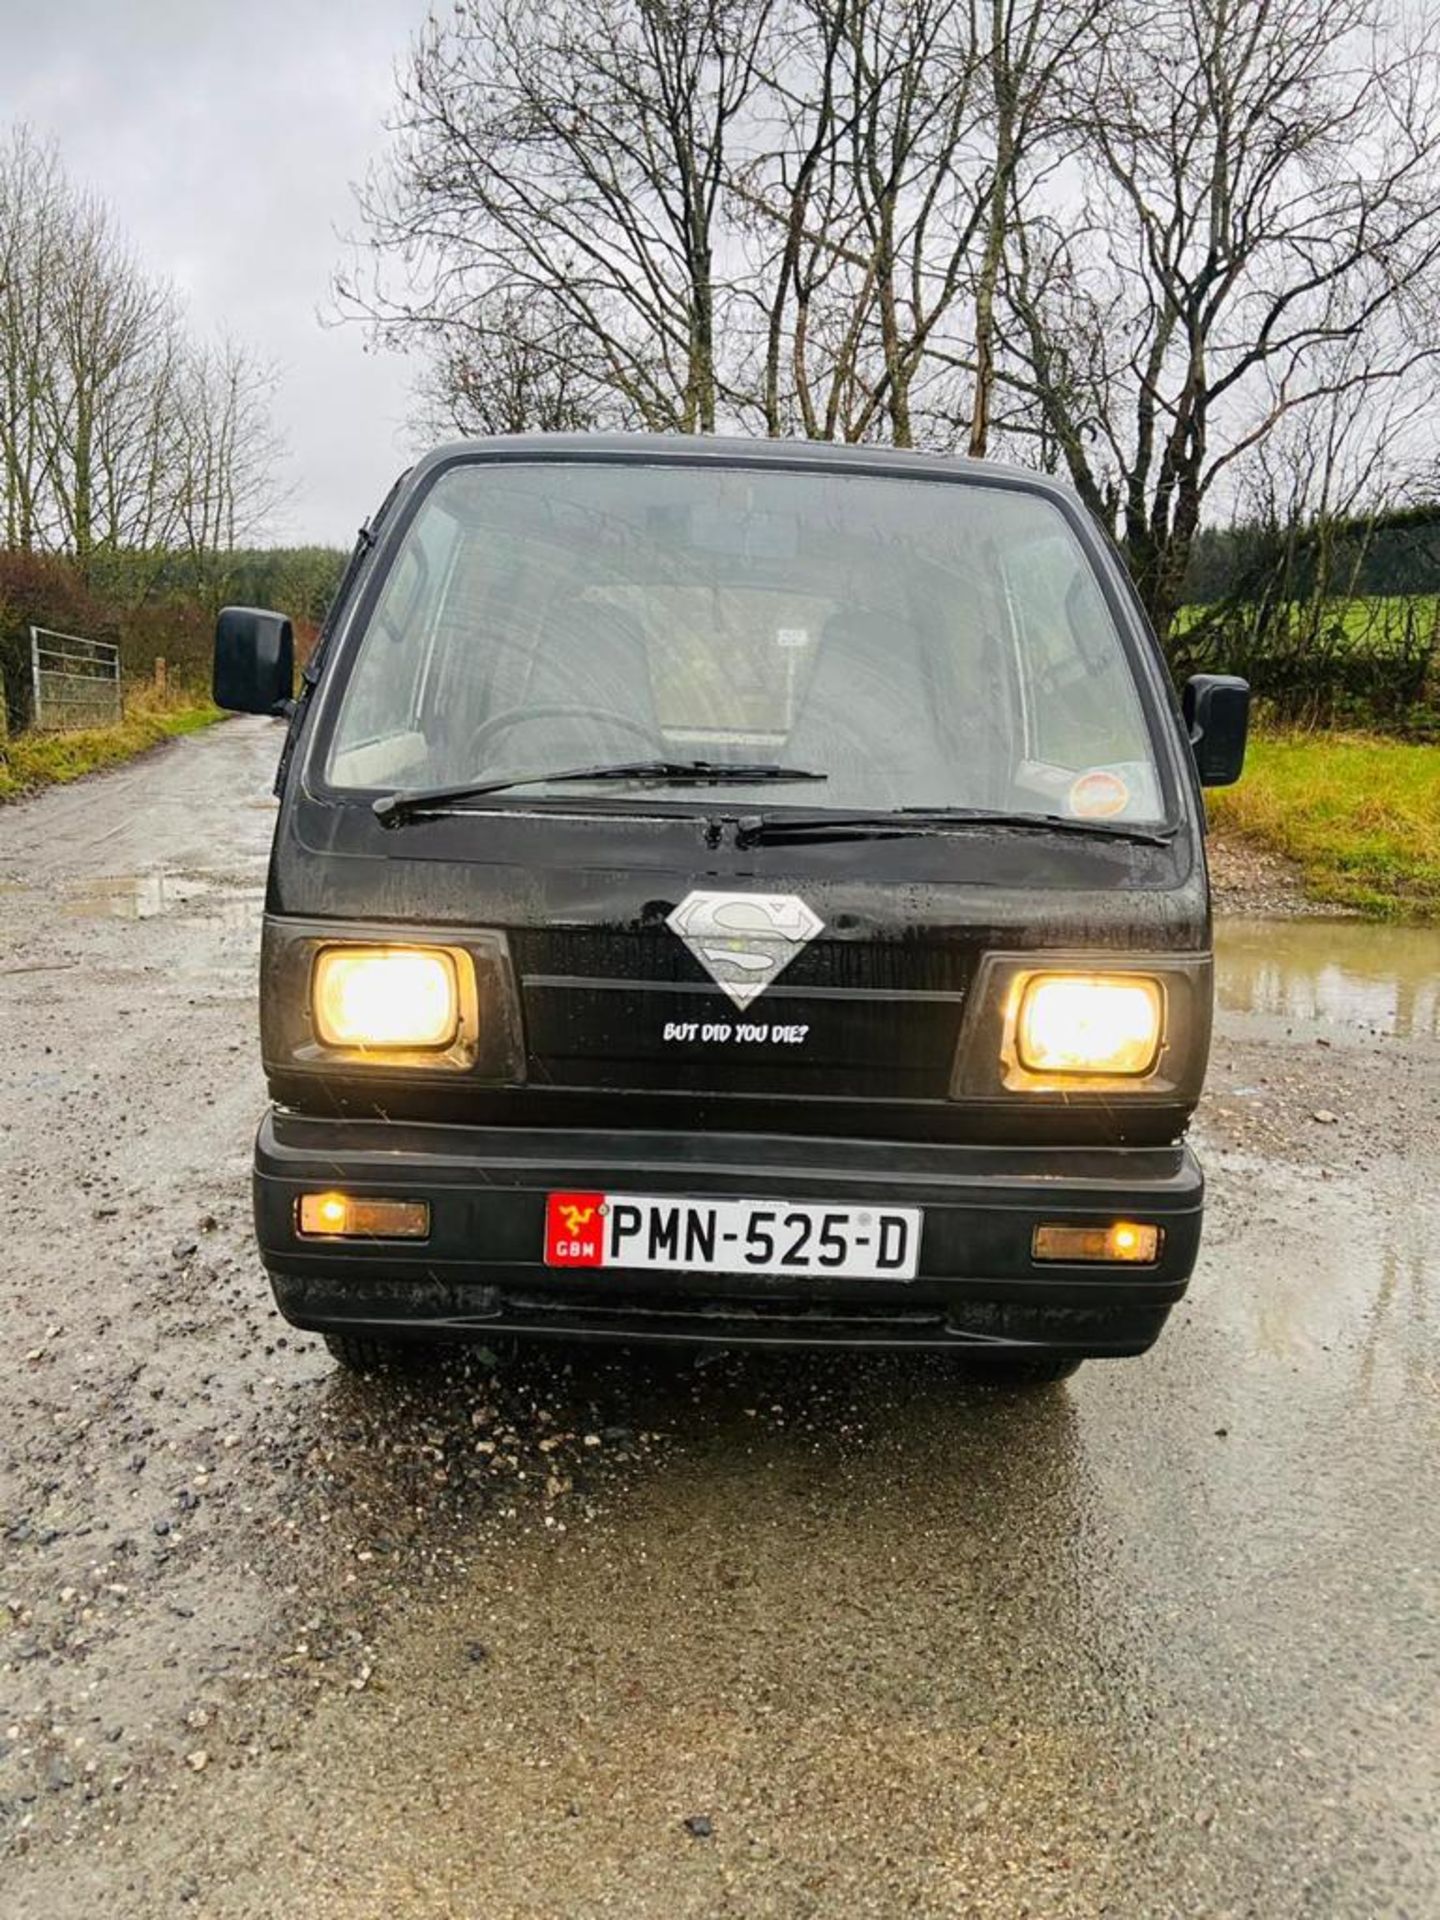 1995 SUZUKI CARRIER, 995CC, TAXED, ON ISLE OF MAN PLATES WITH FULL LOG BOOK *NO VAT* - Image 2 of 6